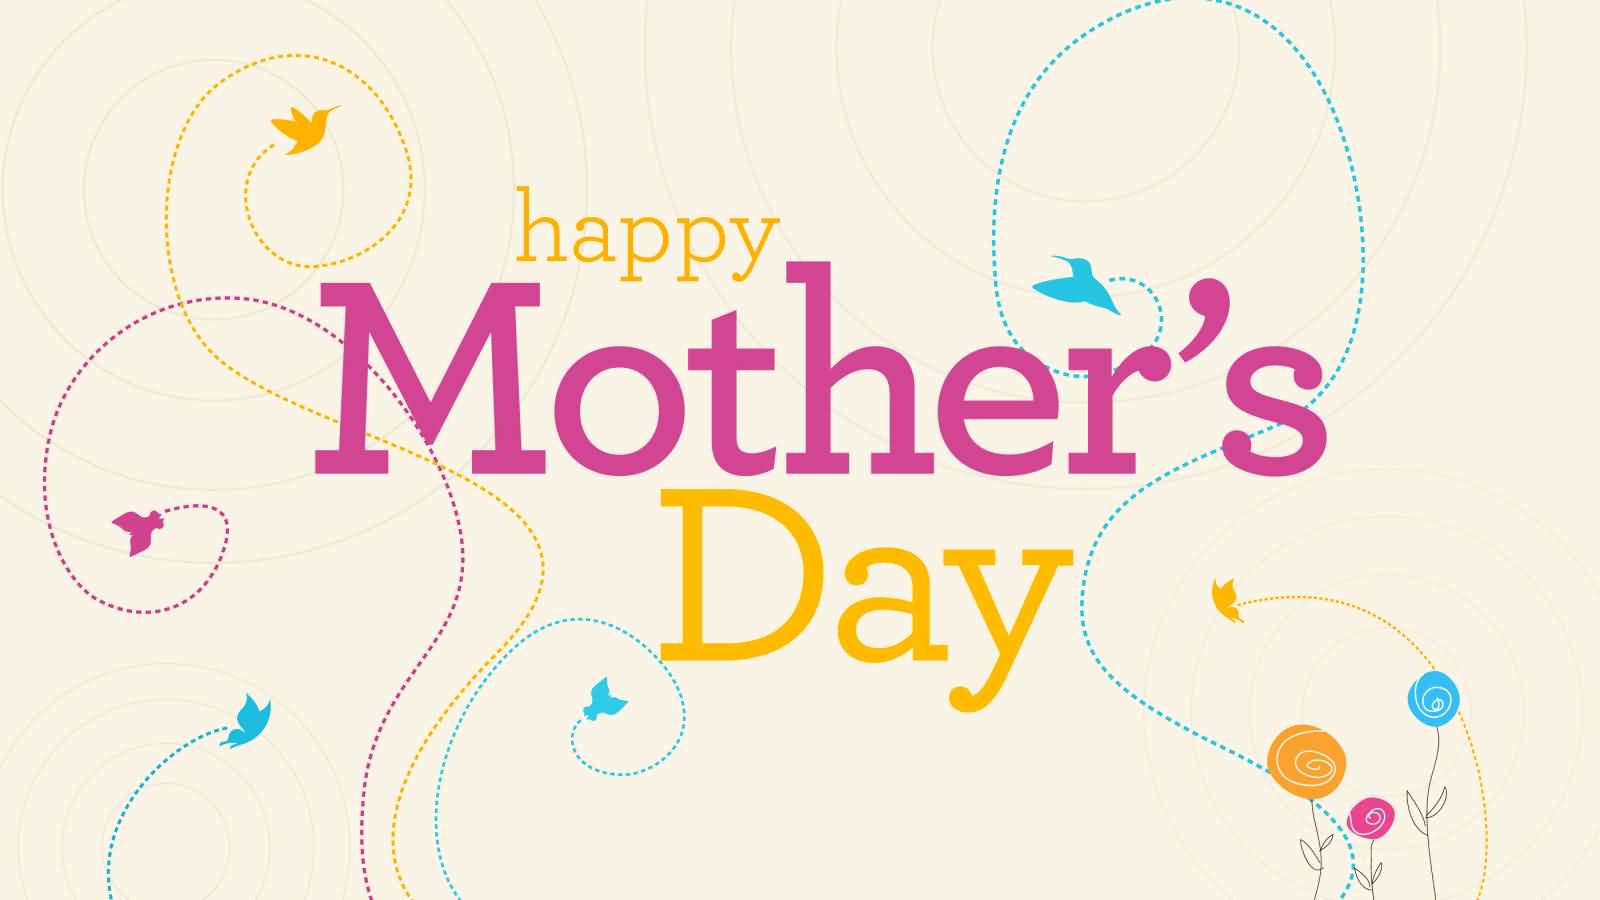 Happy Mother’s Day 2017 Wishes Wallpaper